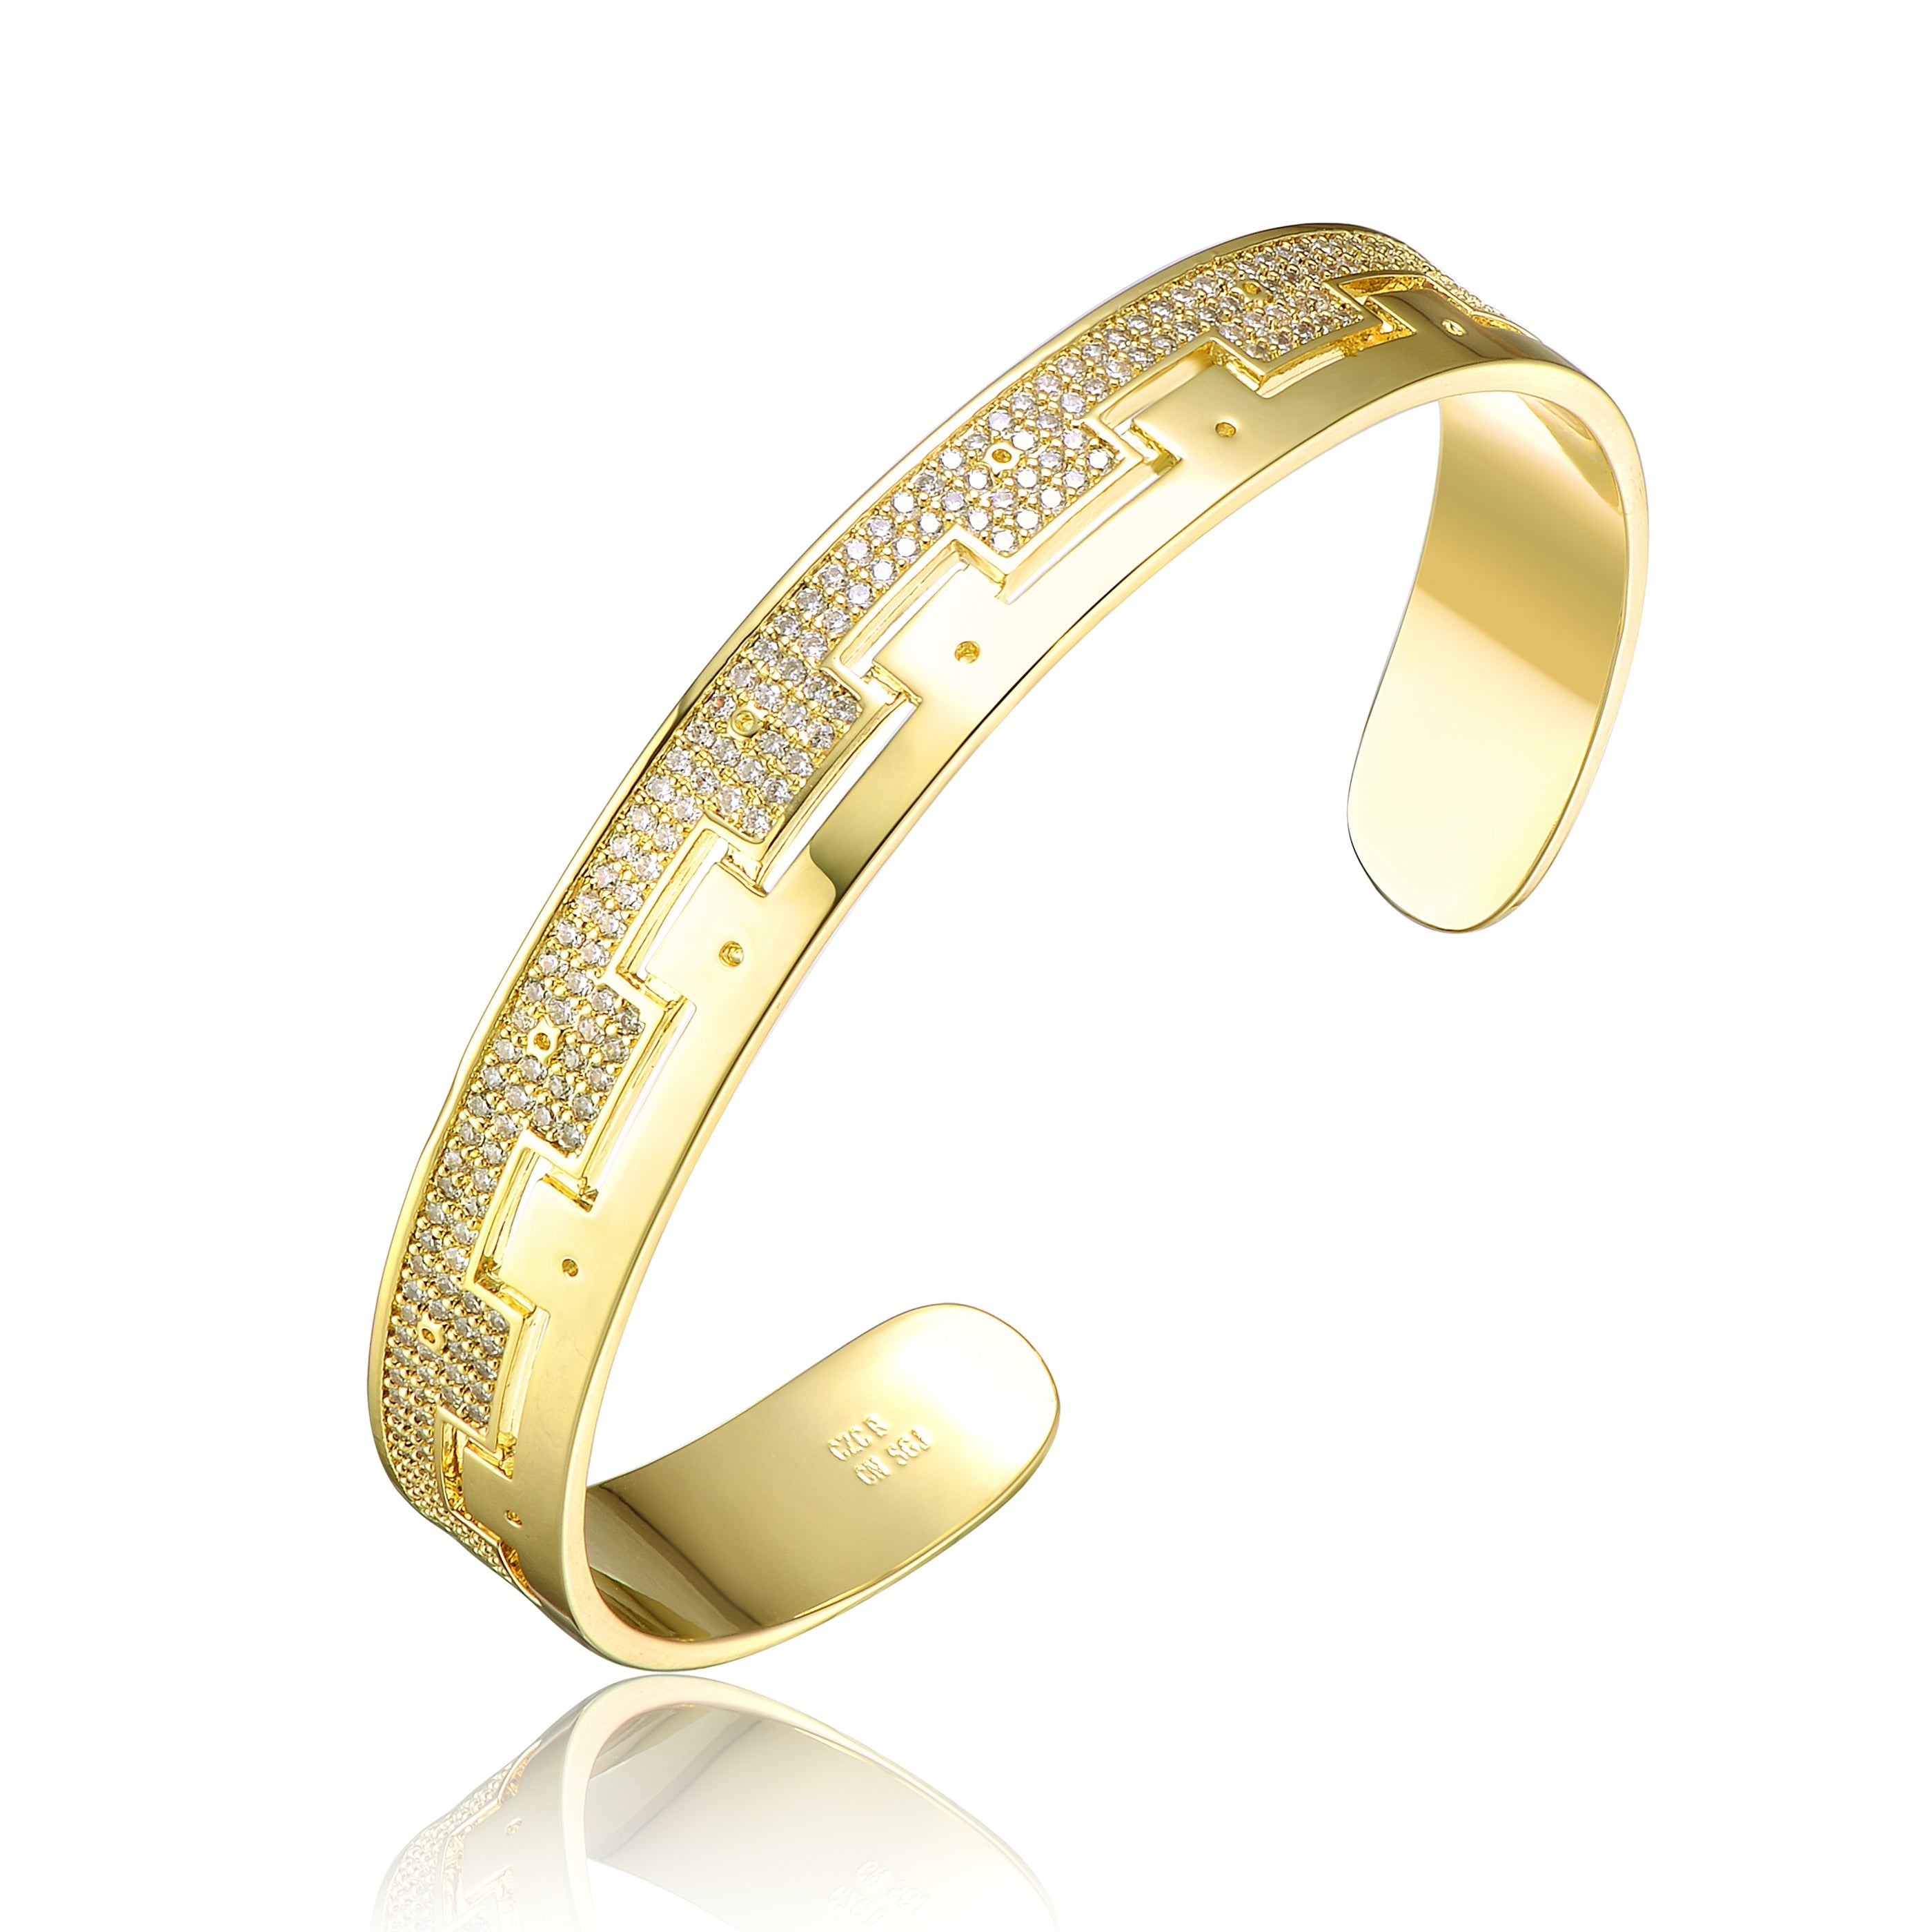 Women’s Gold / White Rachel Glauber Gold Plated With Cubic Zirconias Cuff Bracelet Genevive Jewelry